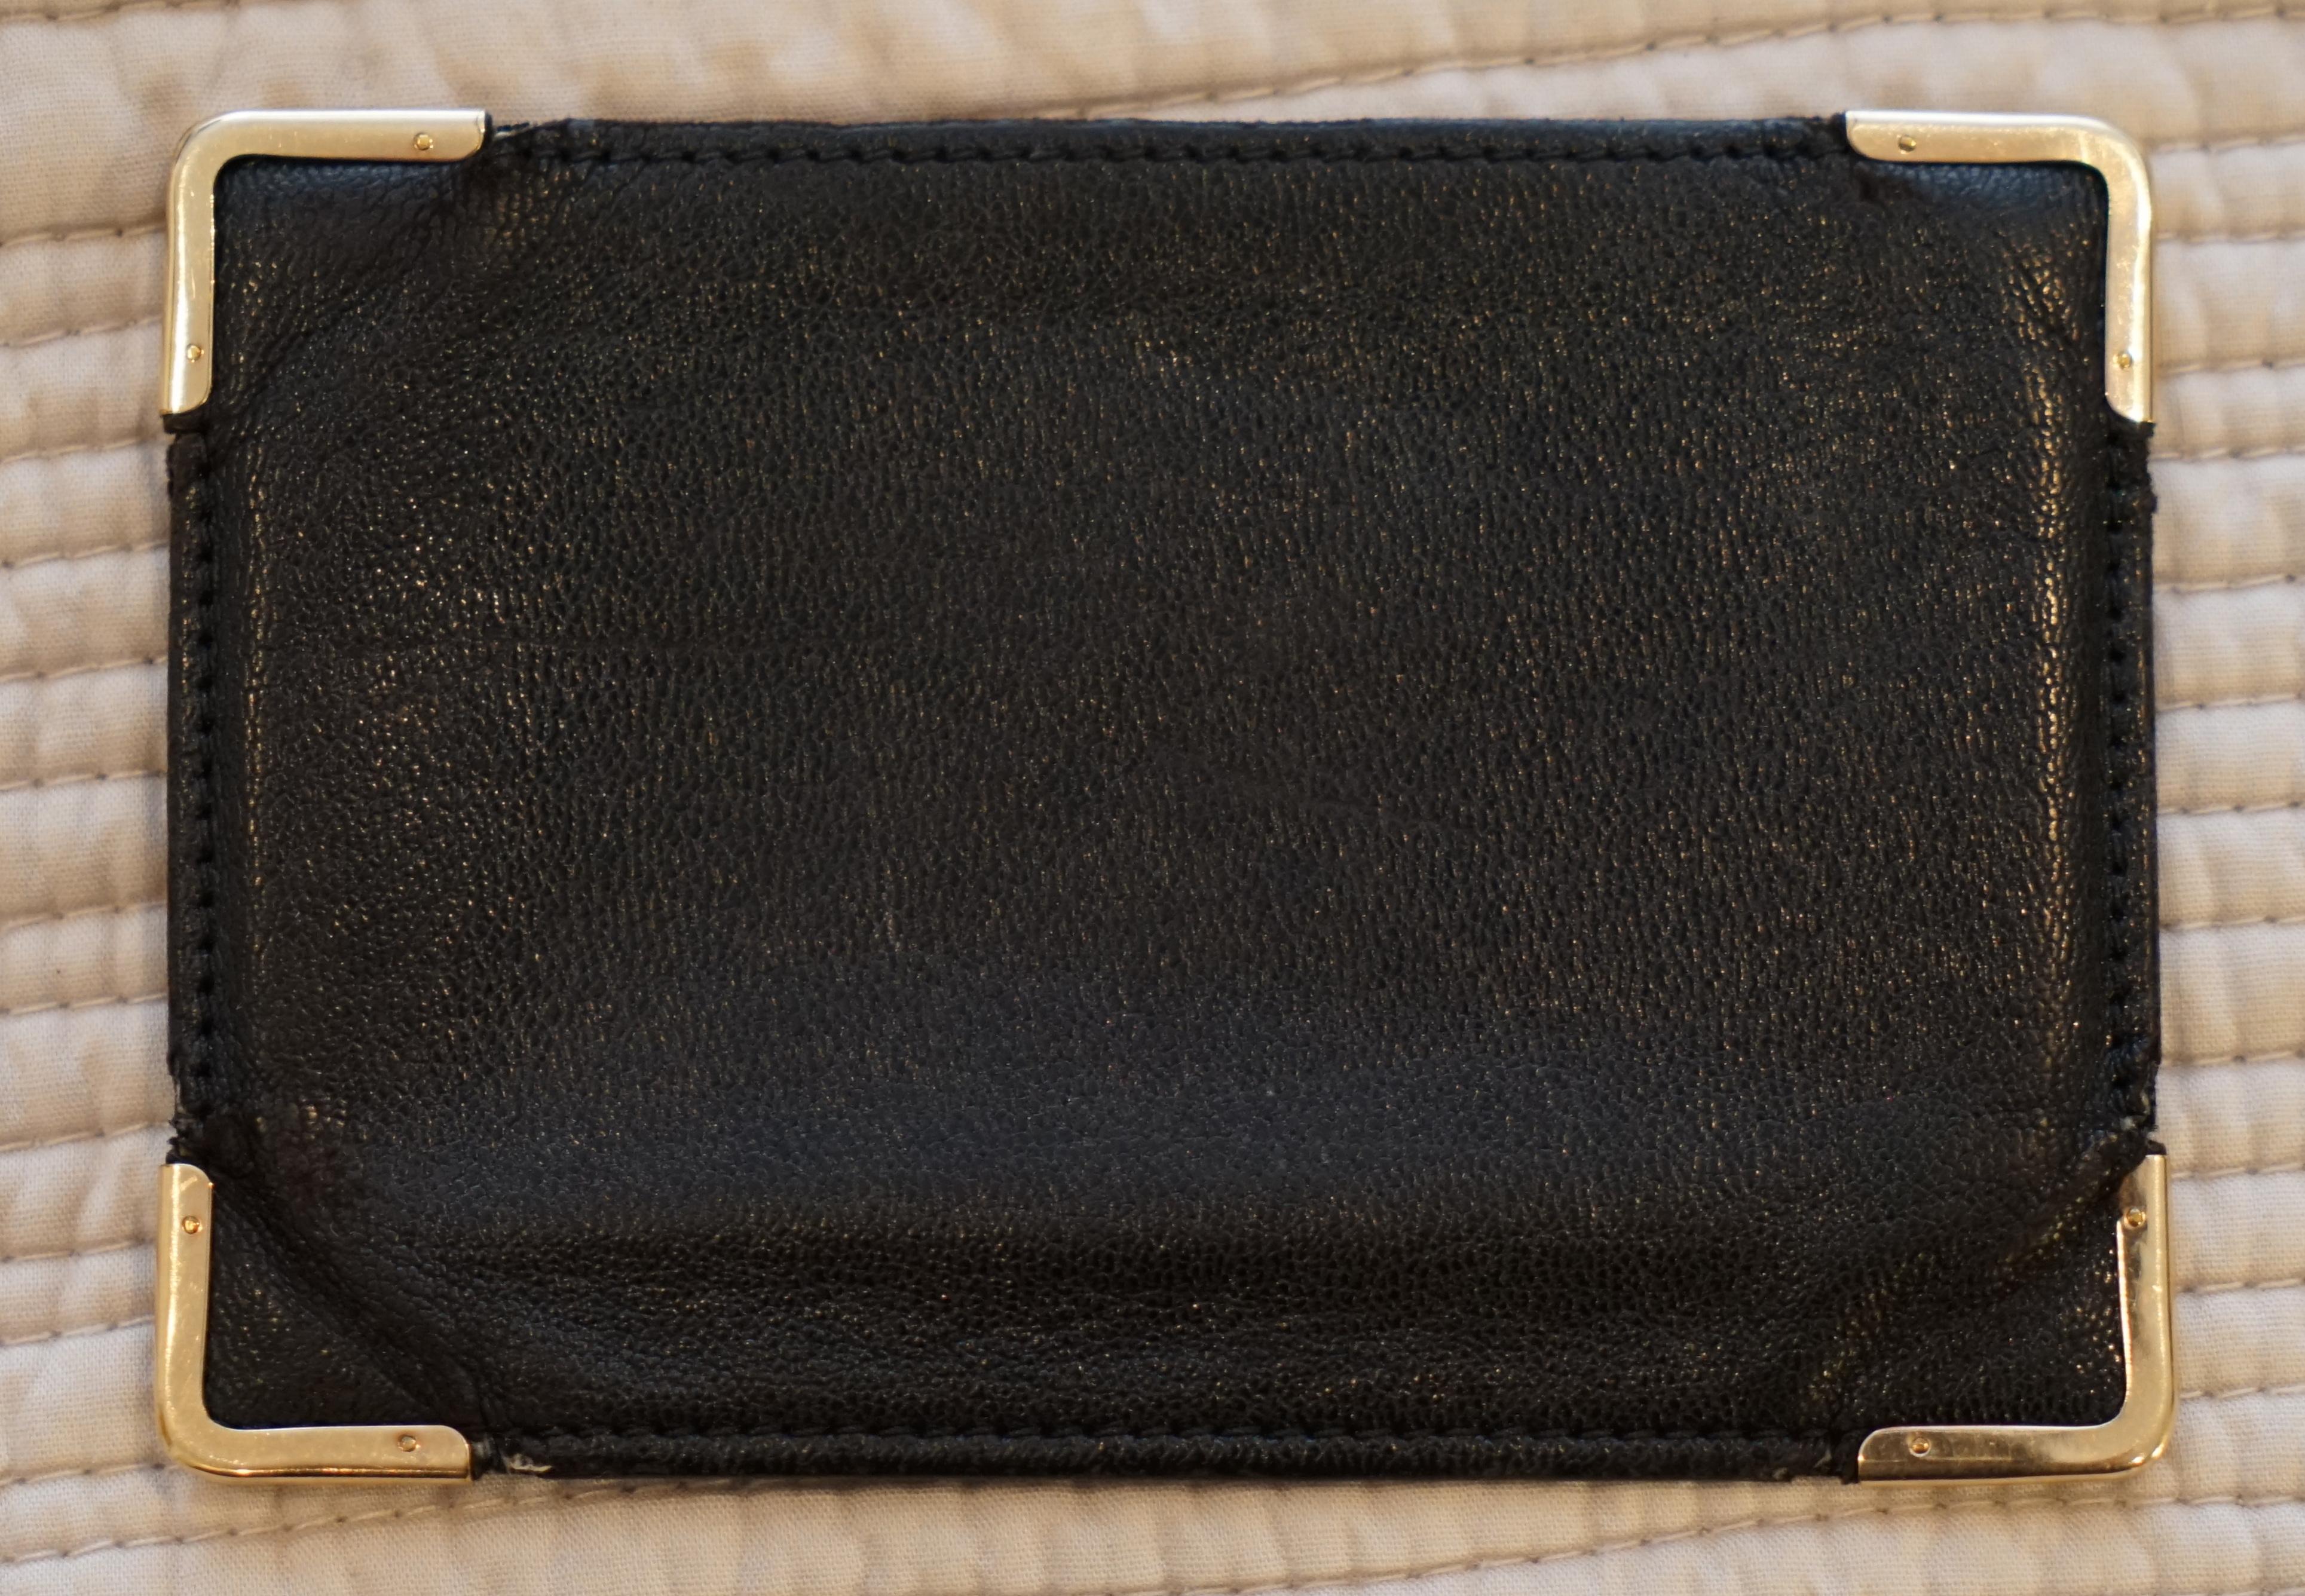 We are delighted to offer for sale this stunning original Asprey London, 1930s Luxury black leather with 9-carat gold stamped corners card case

A beautiful business or credit card holder in perfect vintage condition, the leather has a lovely soft